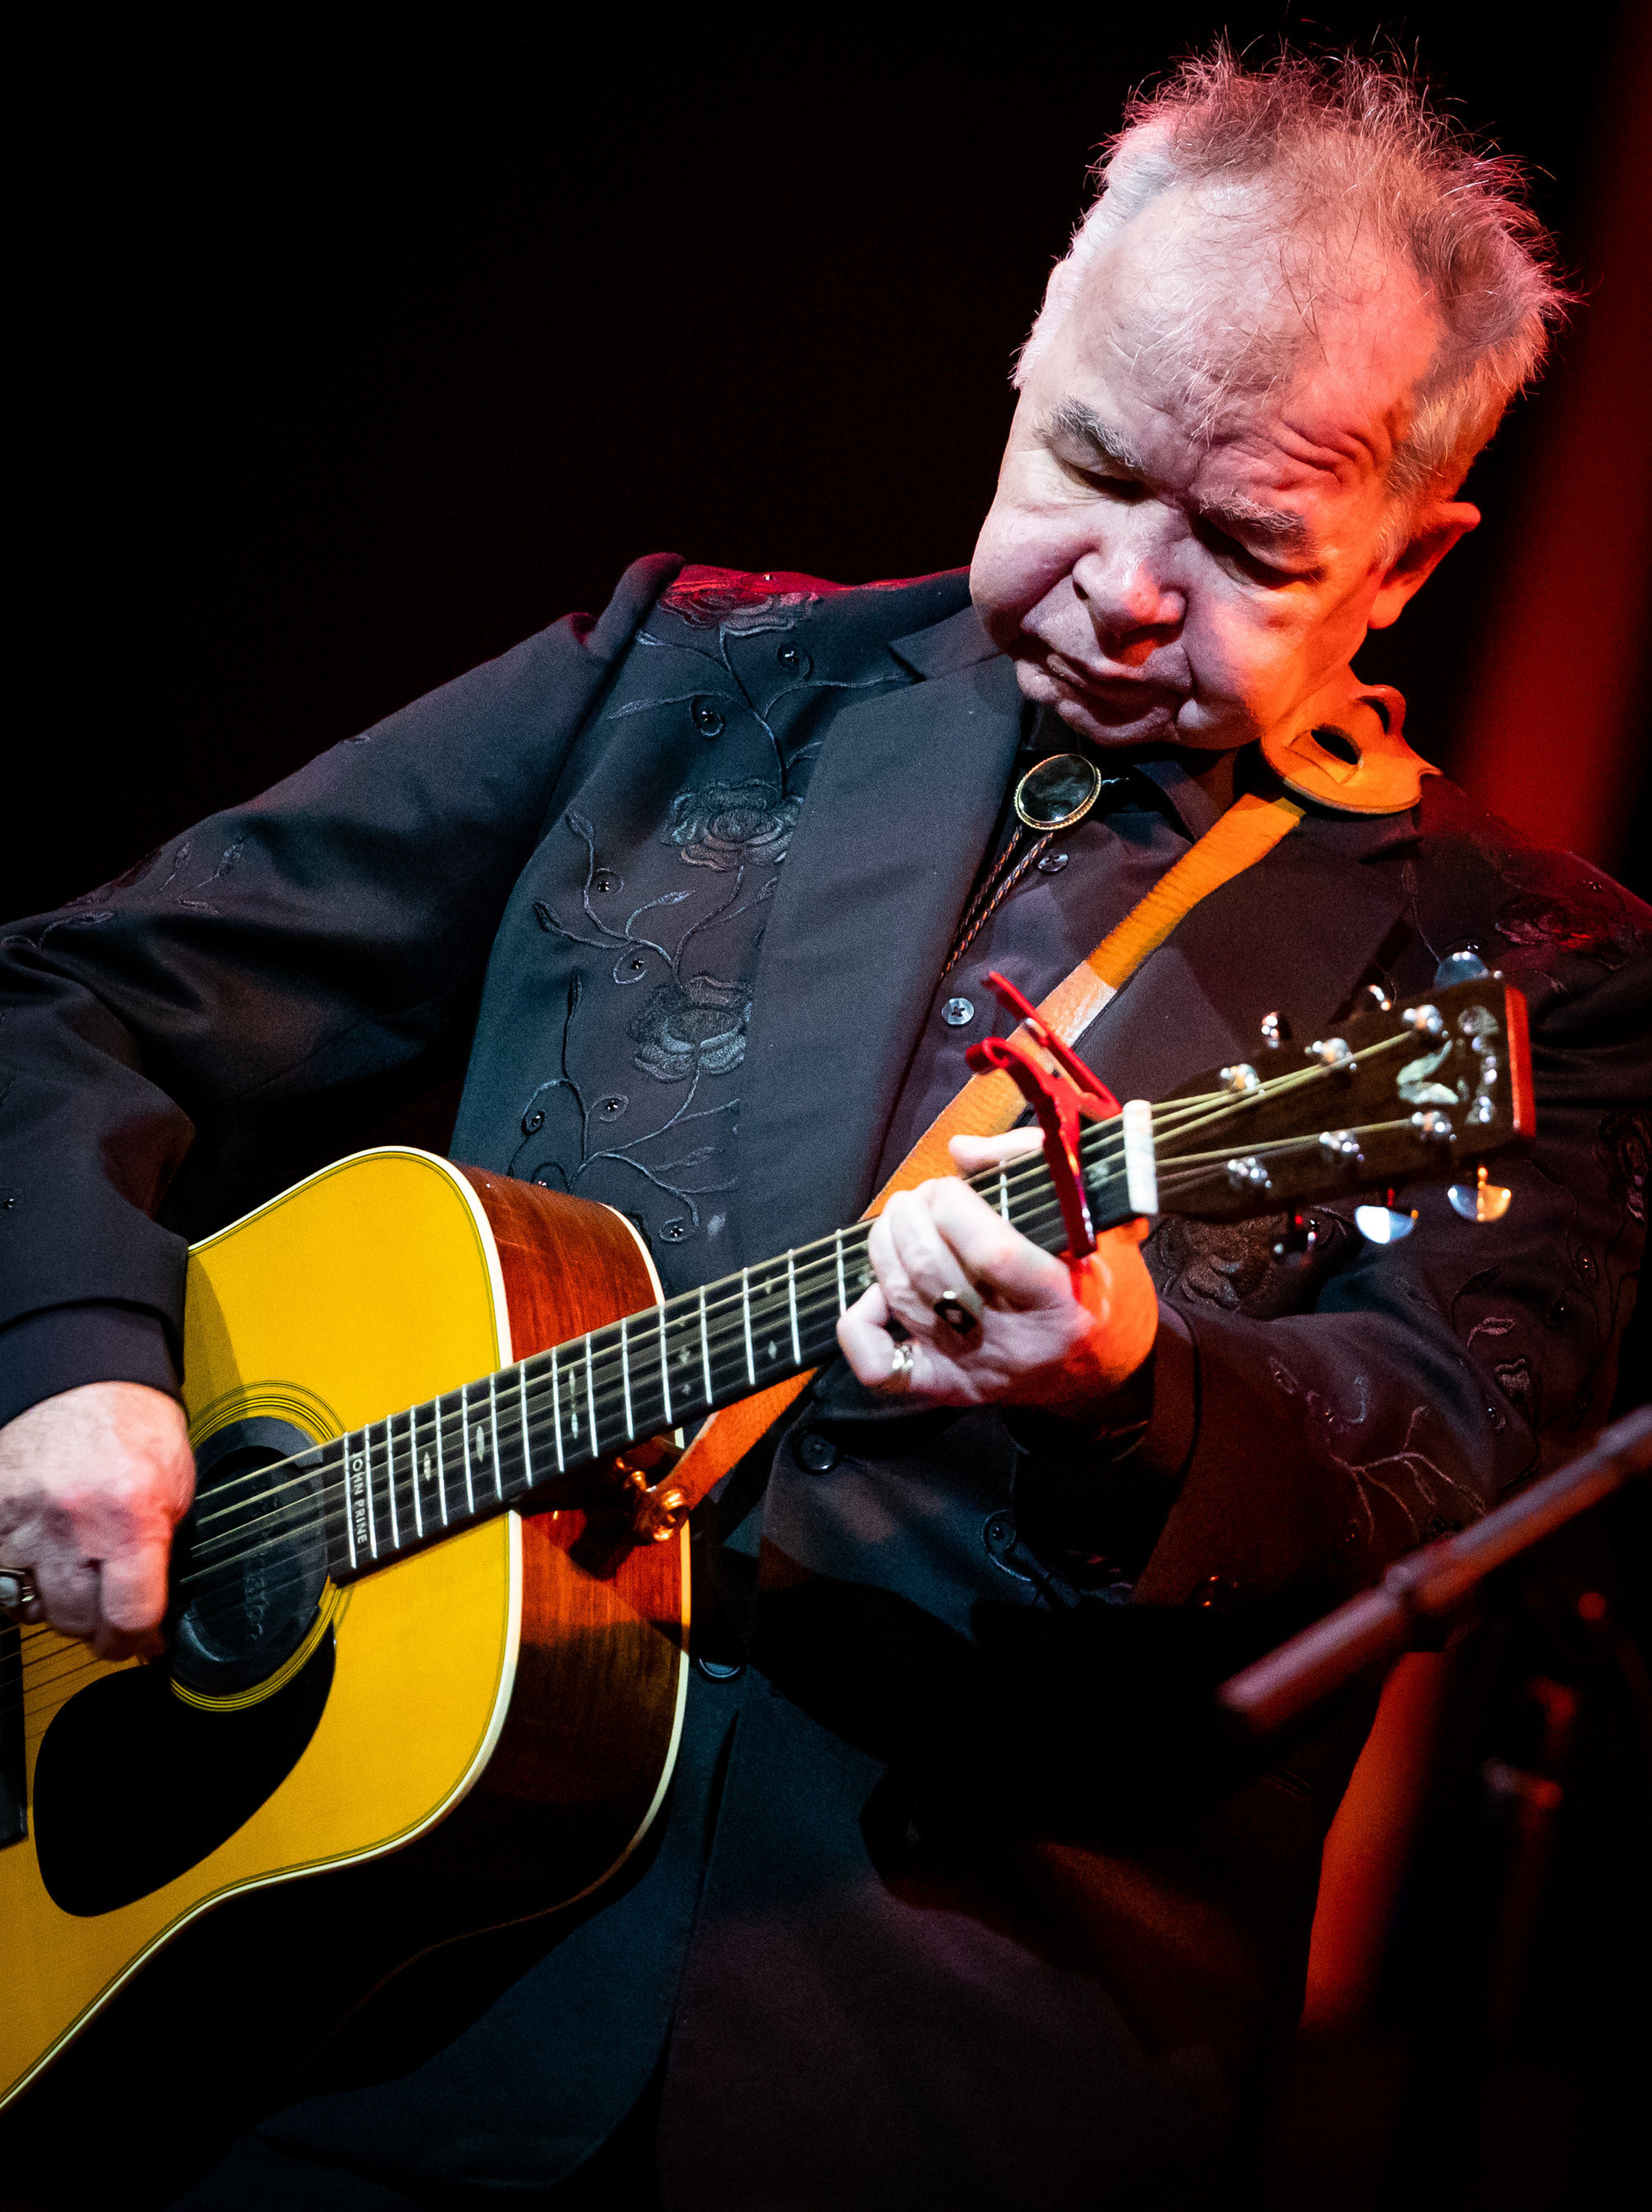 <p>On April 7, country-folk singer and songwriter John Prine, who was known for his raspy vocals and plain-spoken style, passed away from complications caused by COVID-19. He was 73. In addition to being inducted into the Songwriters Hall of Fame, John -- a real songwriter's songwriter beloved by fans and musicians alike -- was the recipient of a Grammy lifetime achievement award in 2020. He also has two other Grammys. </p>